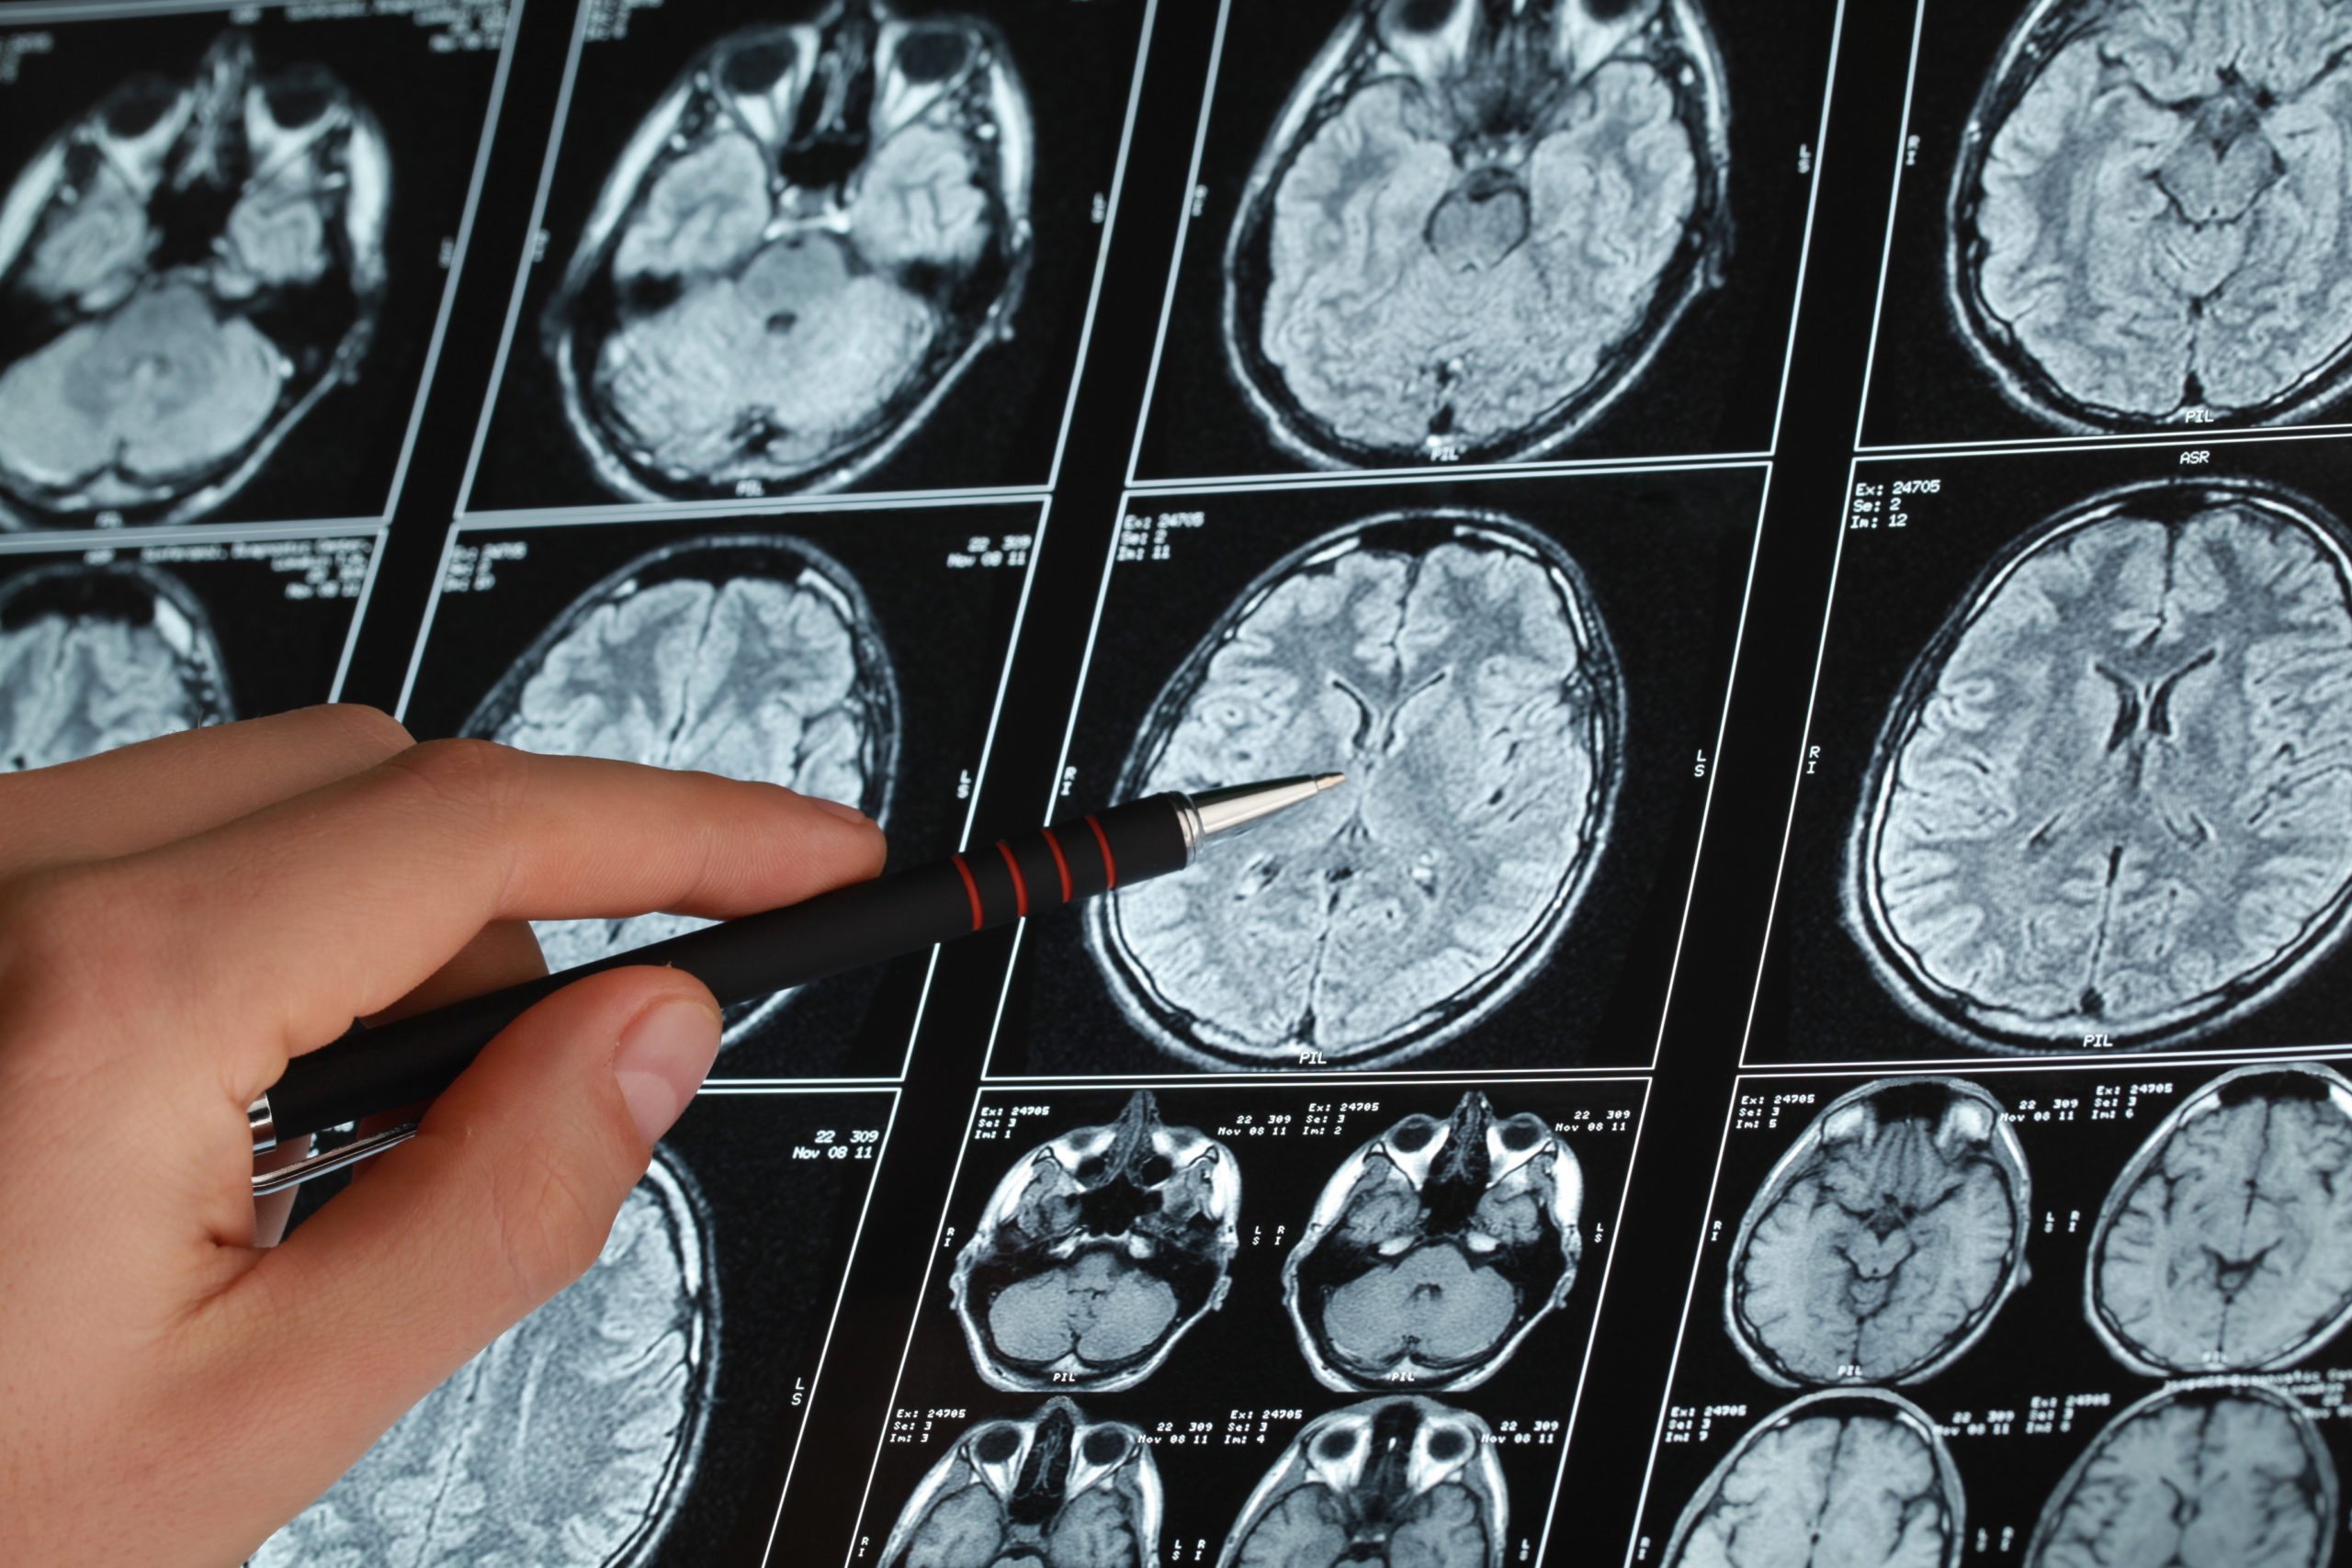 4 Most Frequent Causes of Brain Injuries